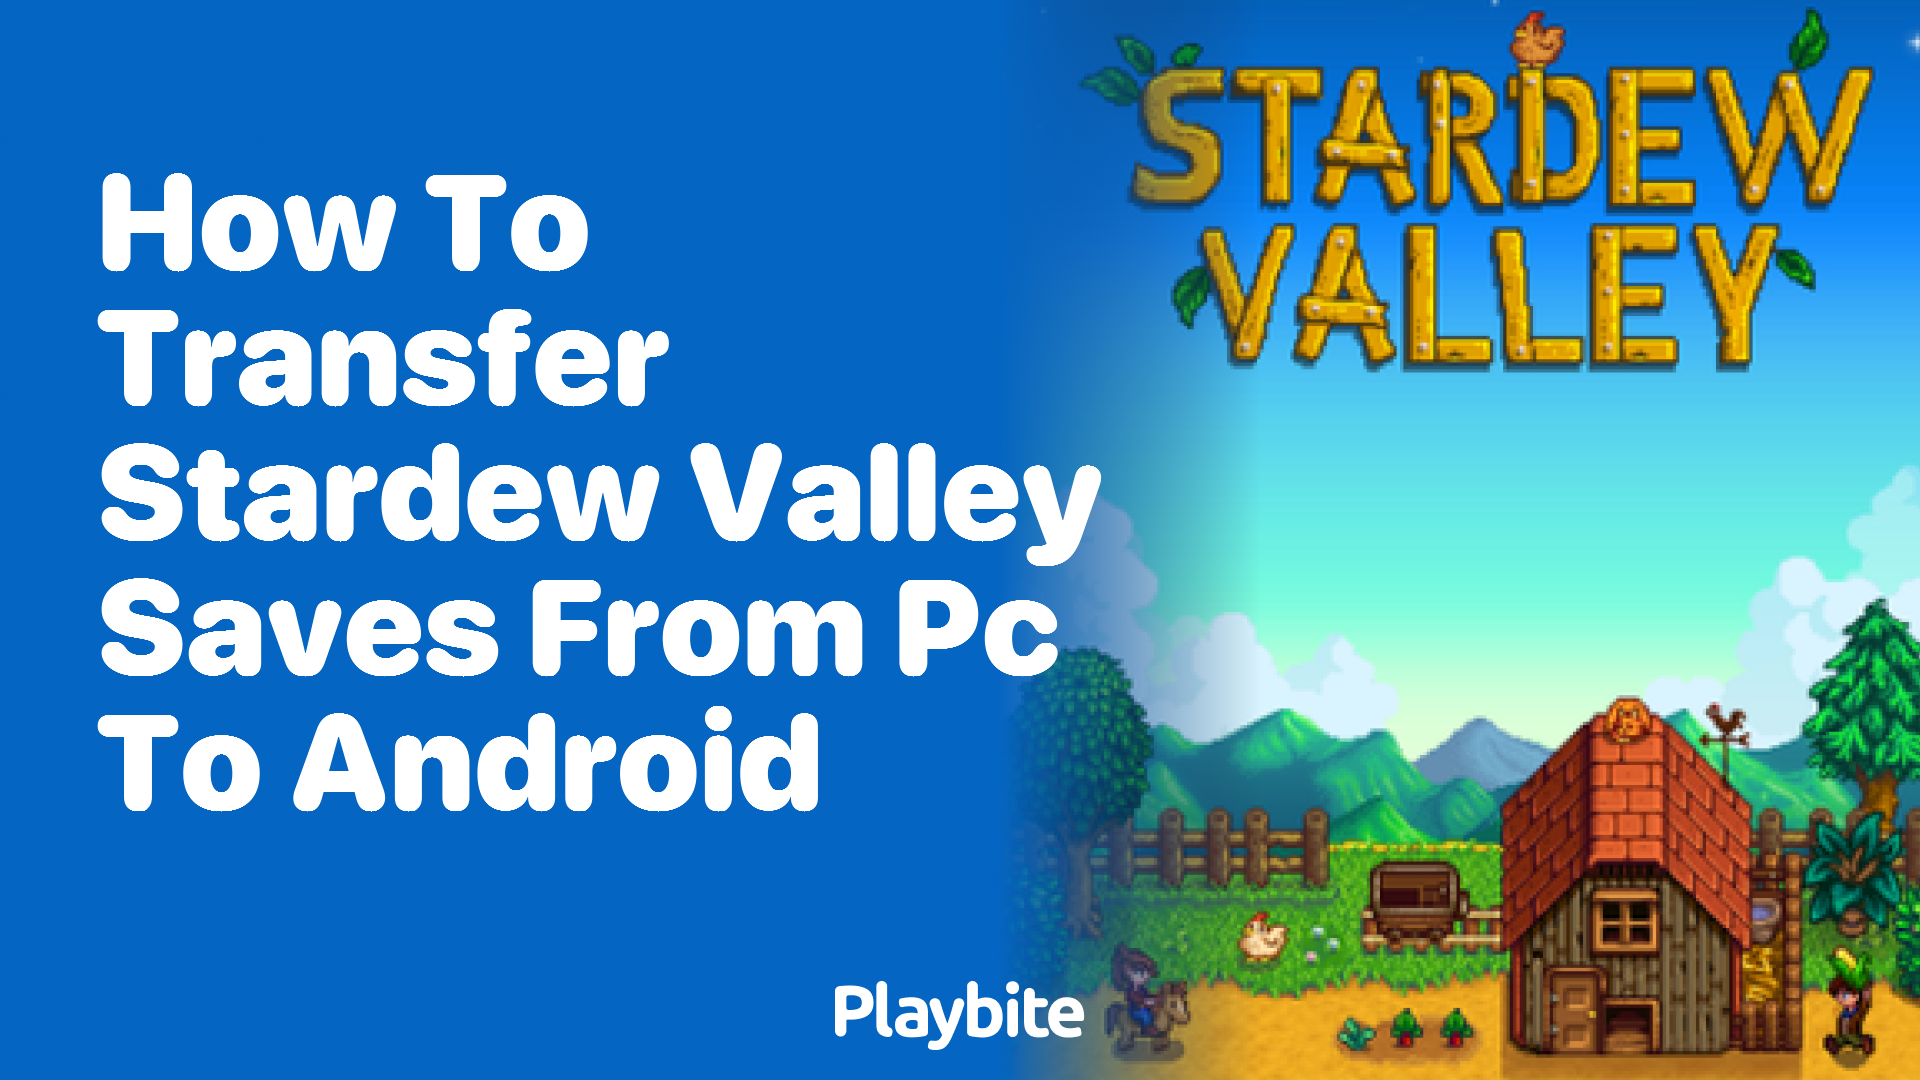 How to Transfer Stardew Valley Saves from PC to Android